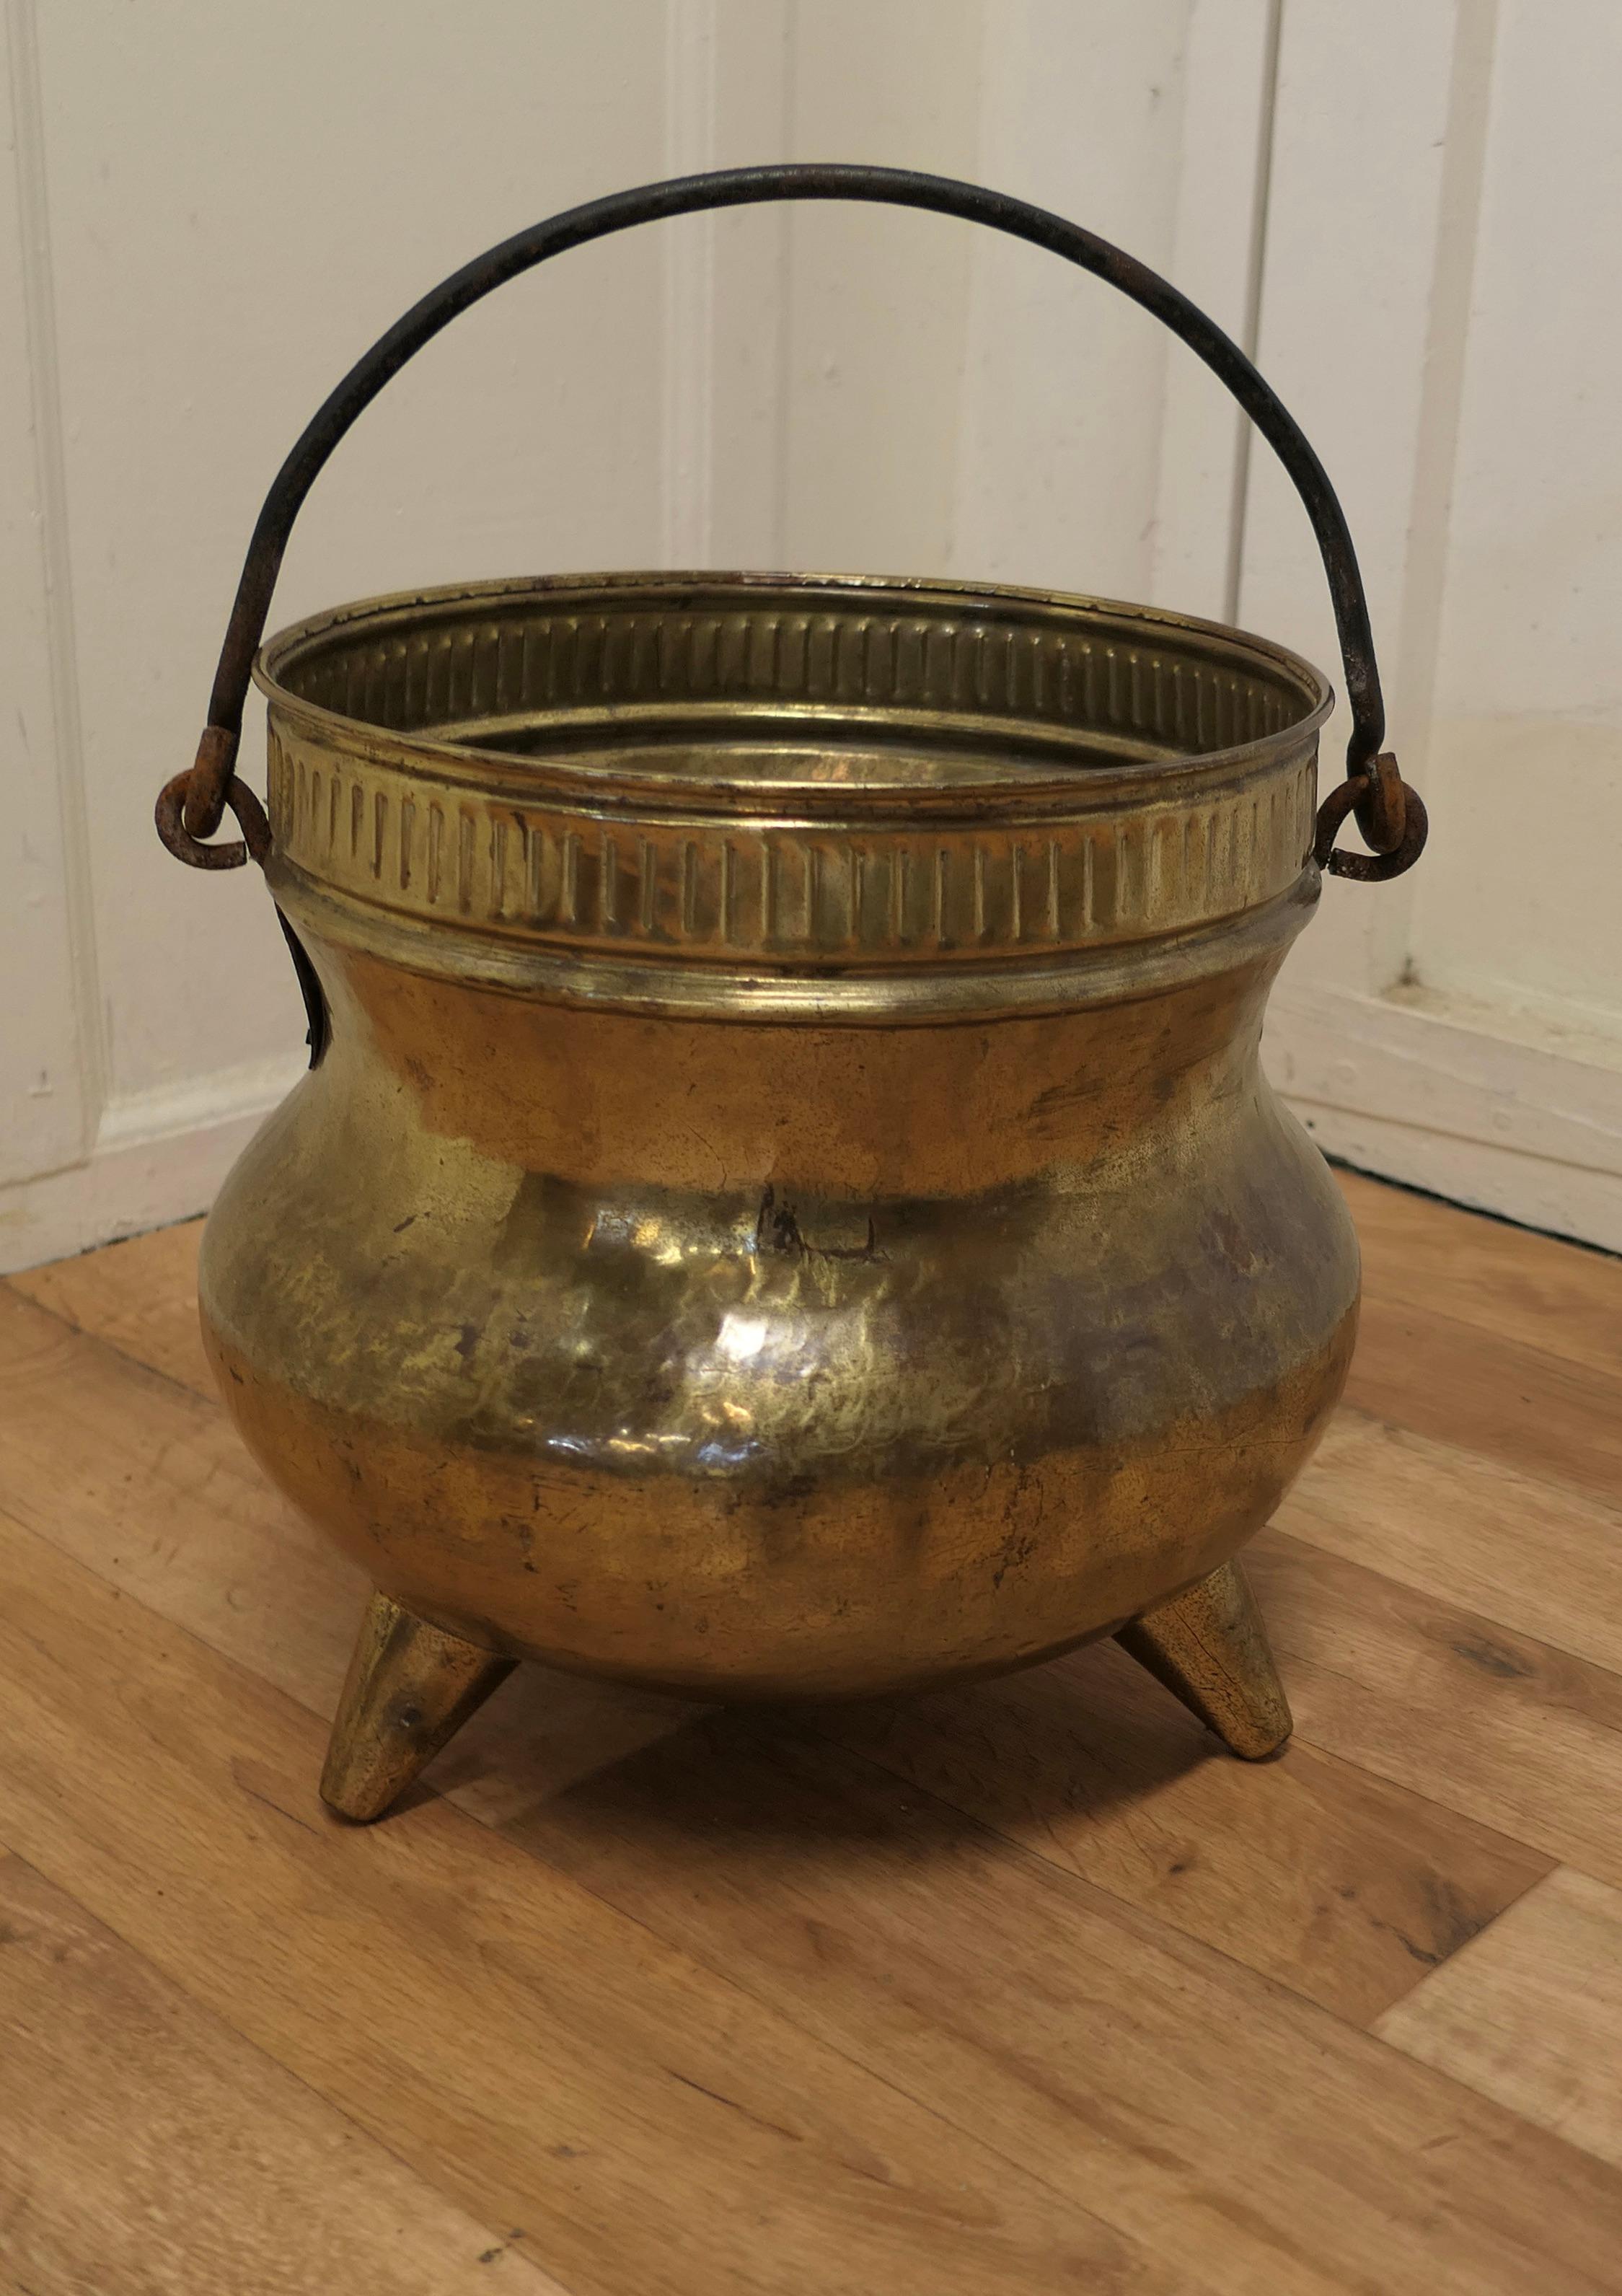 19th century pot belly, brass coal bucket on feet

This is a lovely big beaten copper coal or log bucket, it has a good rounded piece and would make a really good coal or log container and handy because it has a riveted iron carrying handle and it